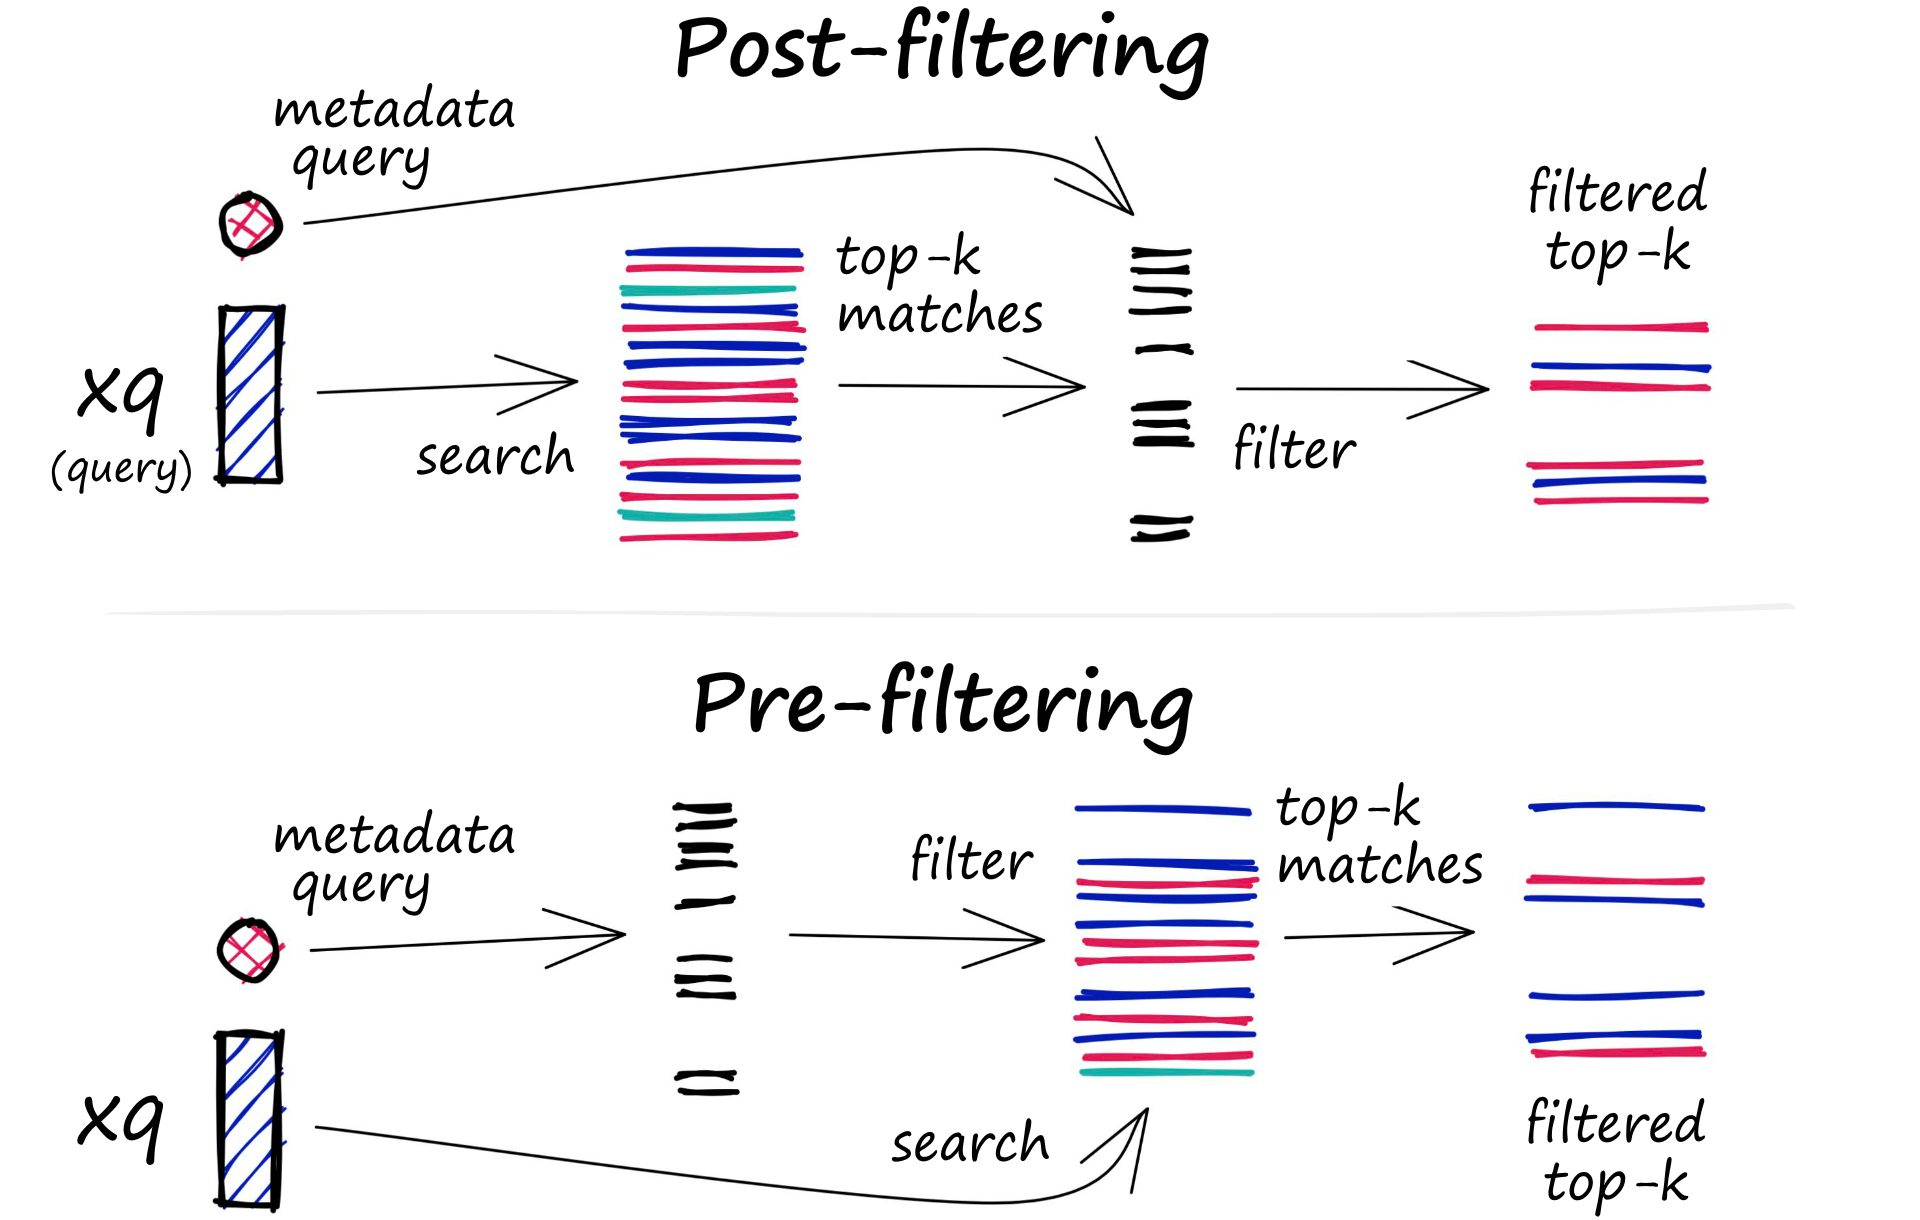 Post-filtering and Pre-filtering